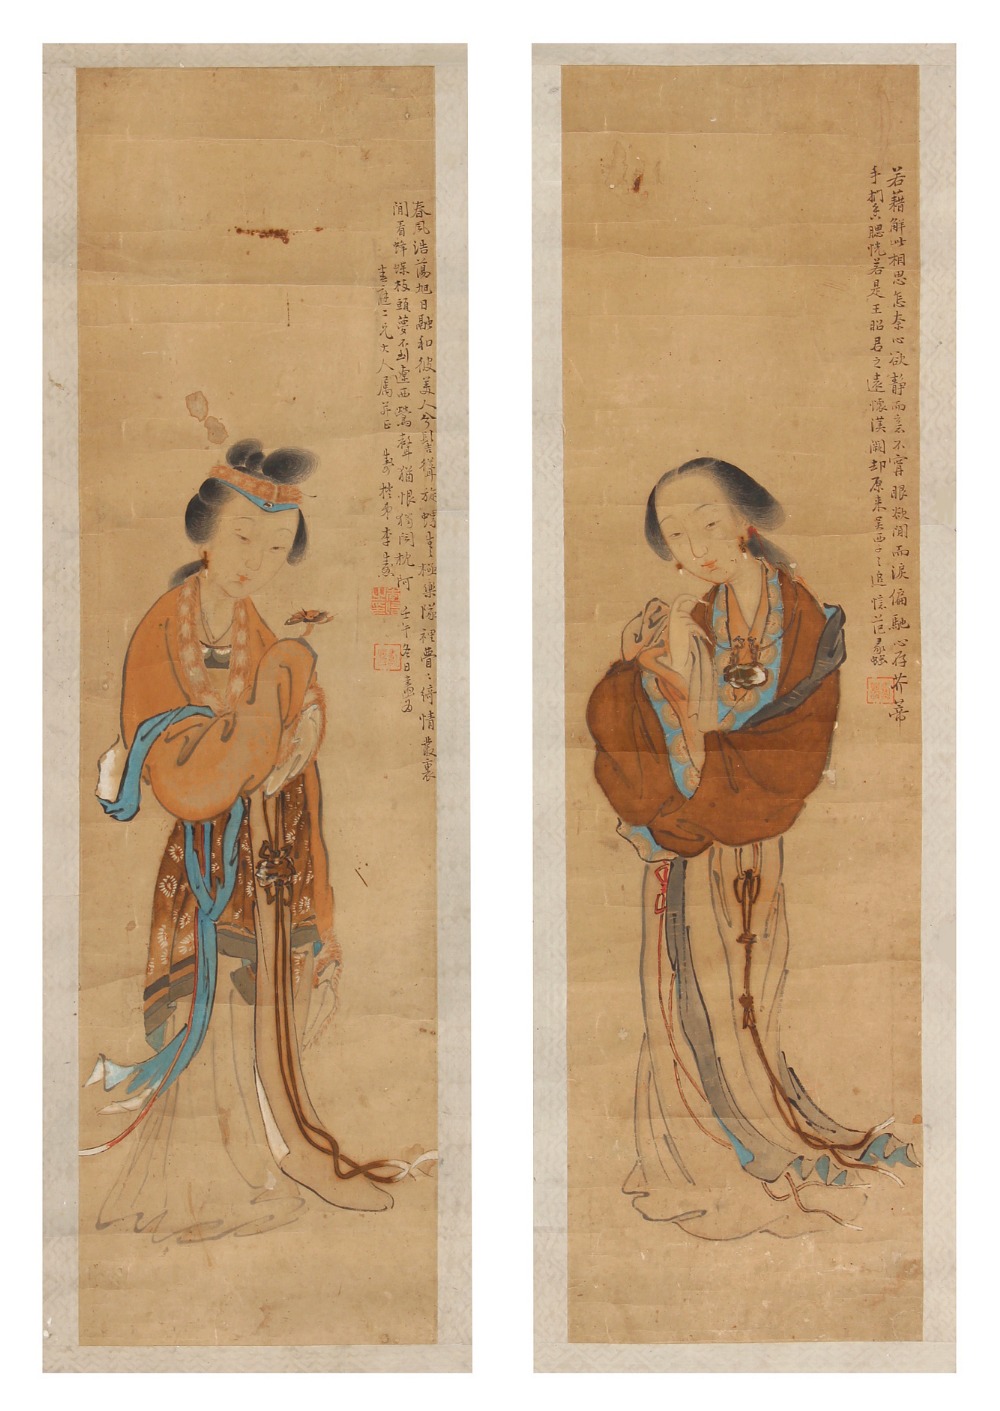 A pair of late 19th century Chinese scroll paintings on paper depicting standing figures, with